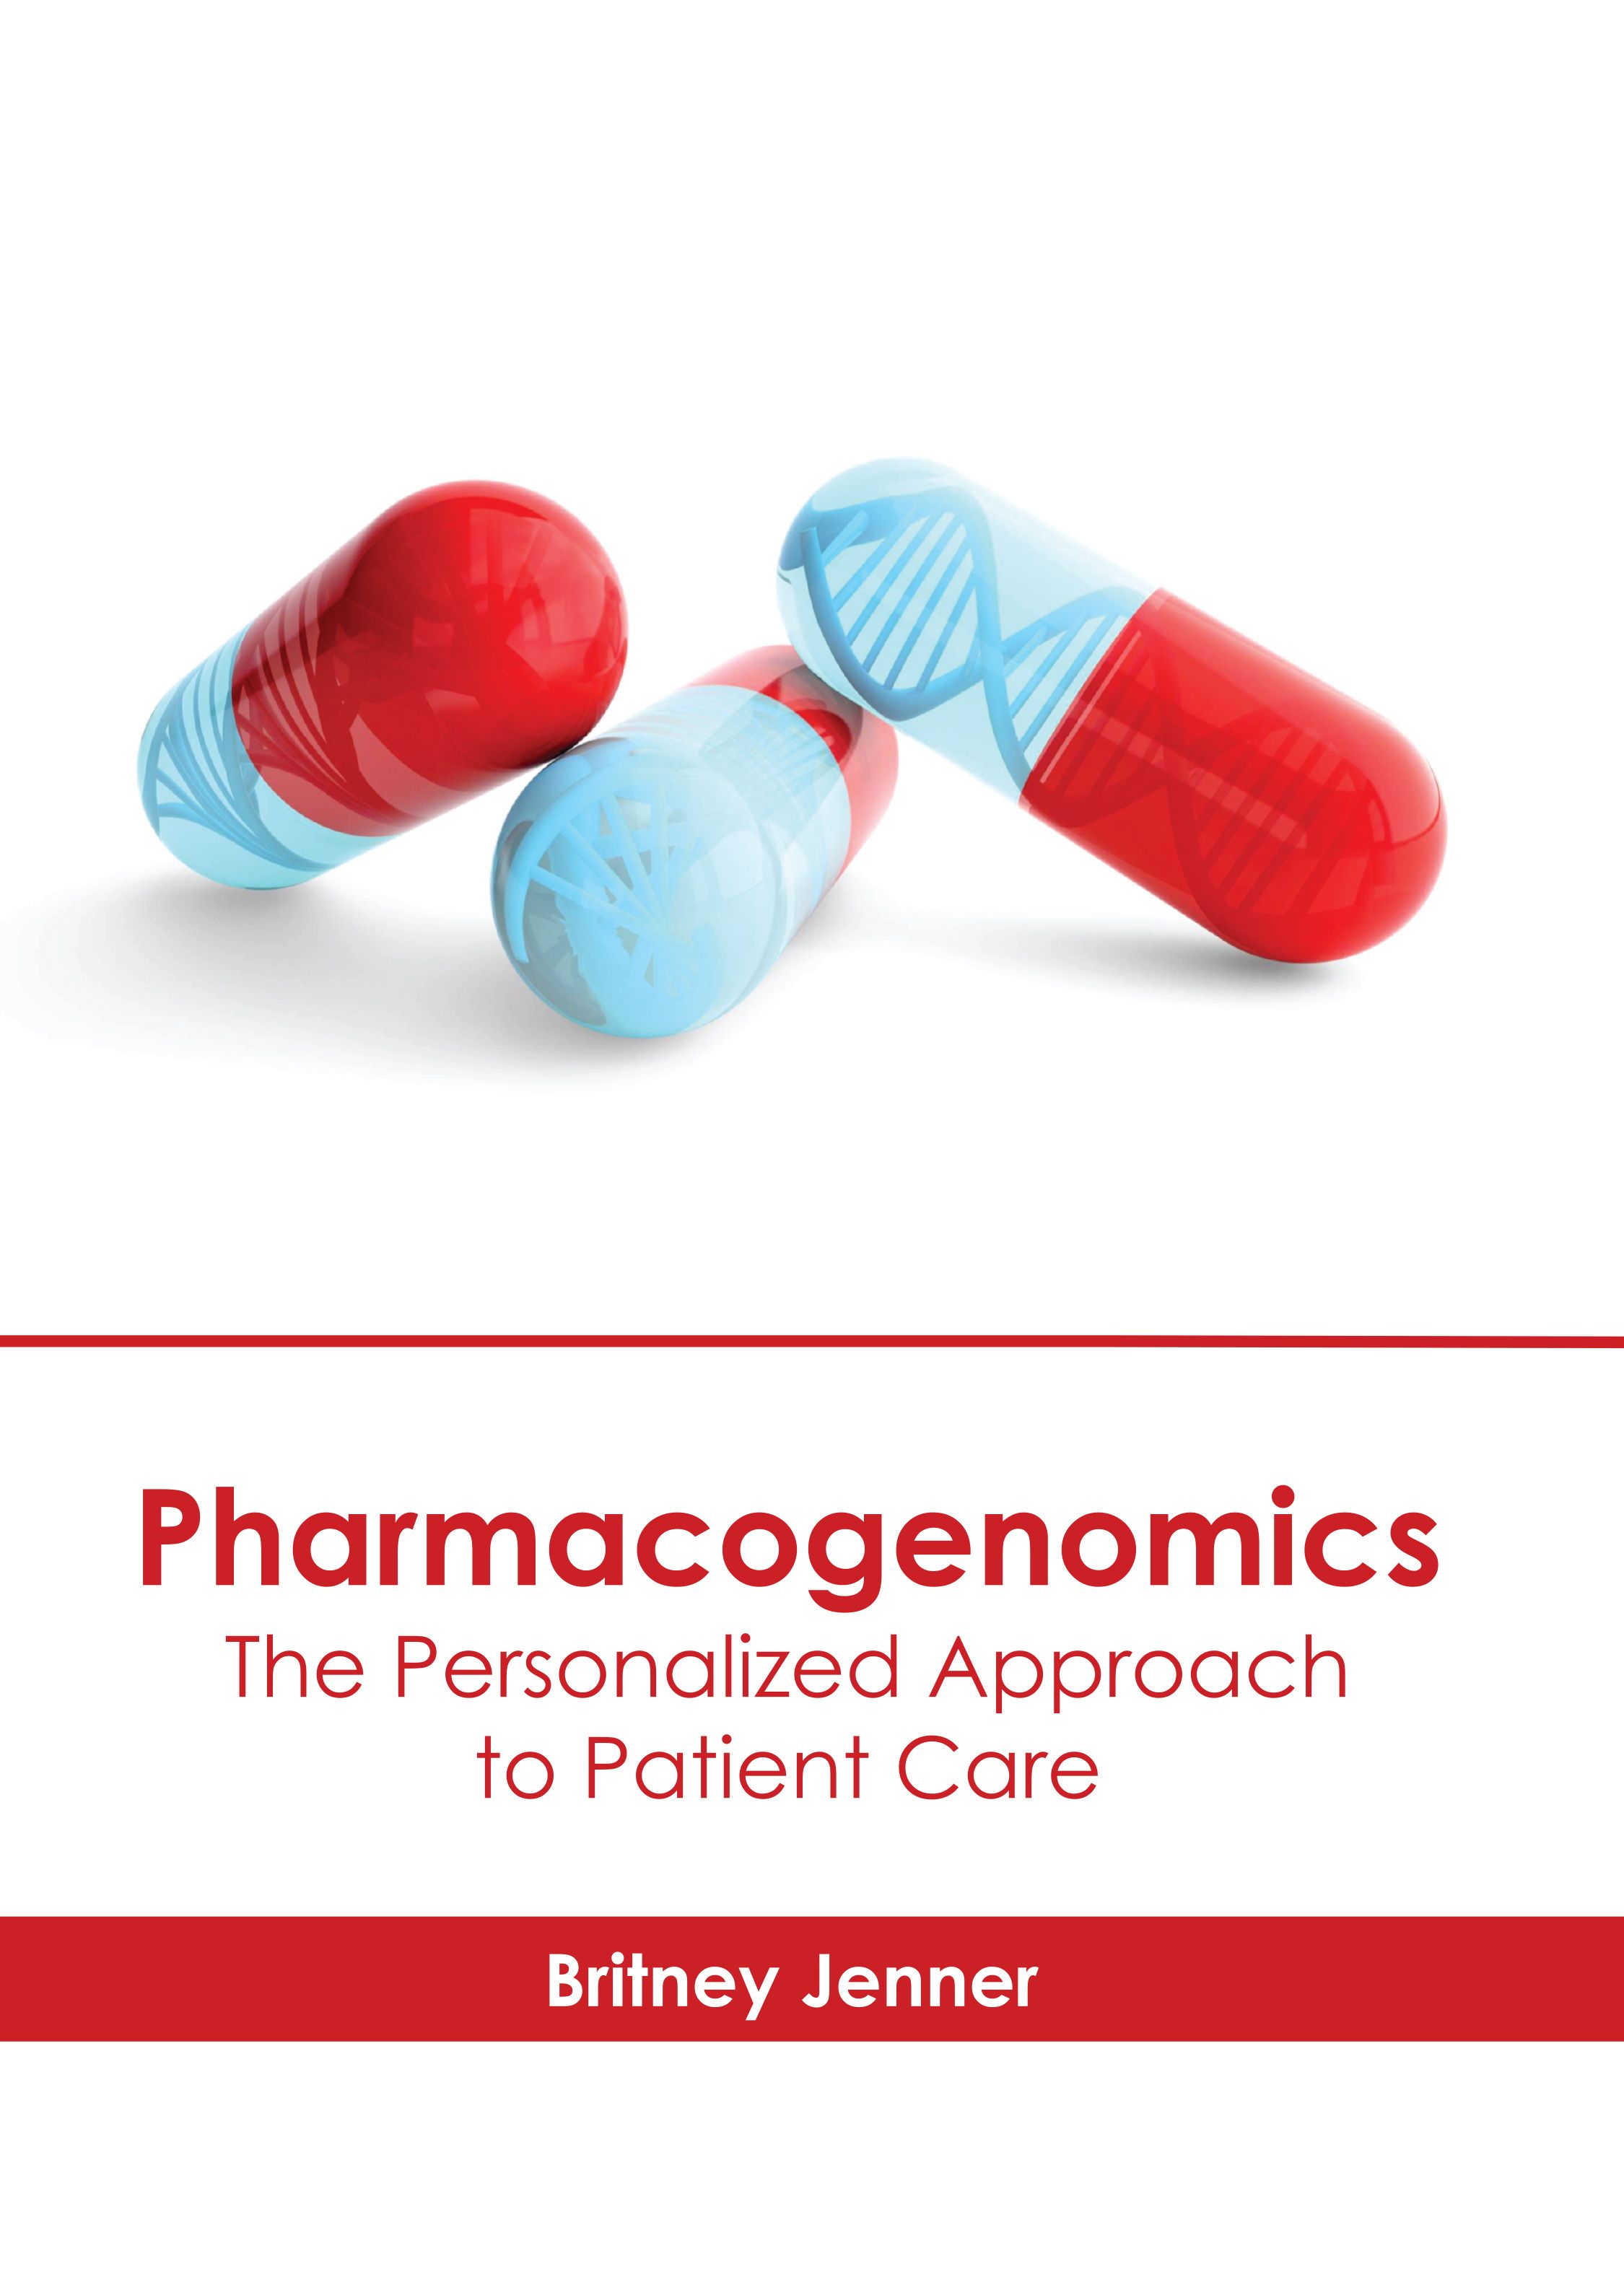 PHARMACOGENOMICS: THE PERSONALIZED APPROACH TO PATIENT CARE